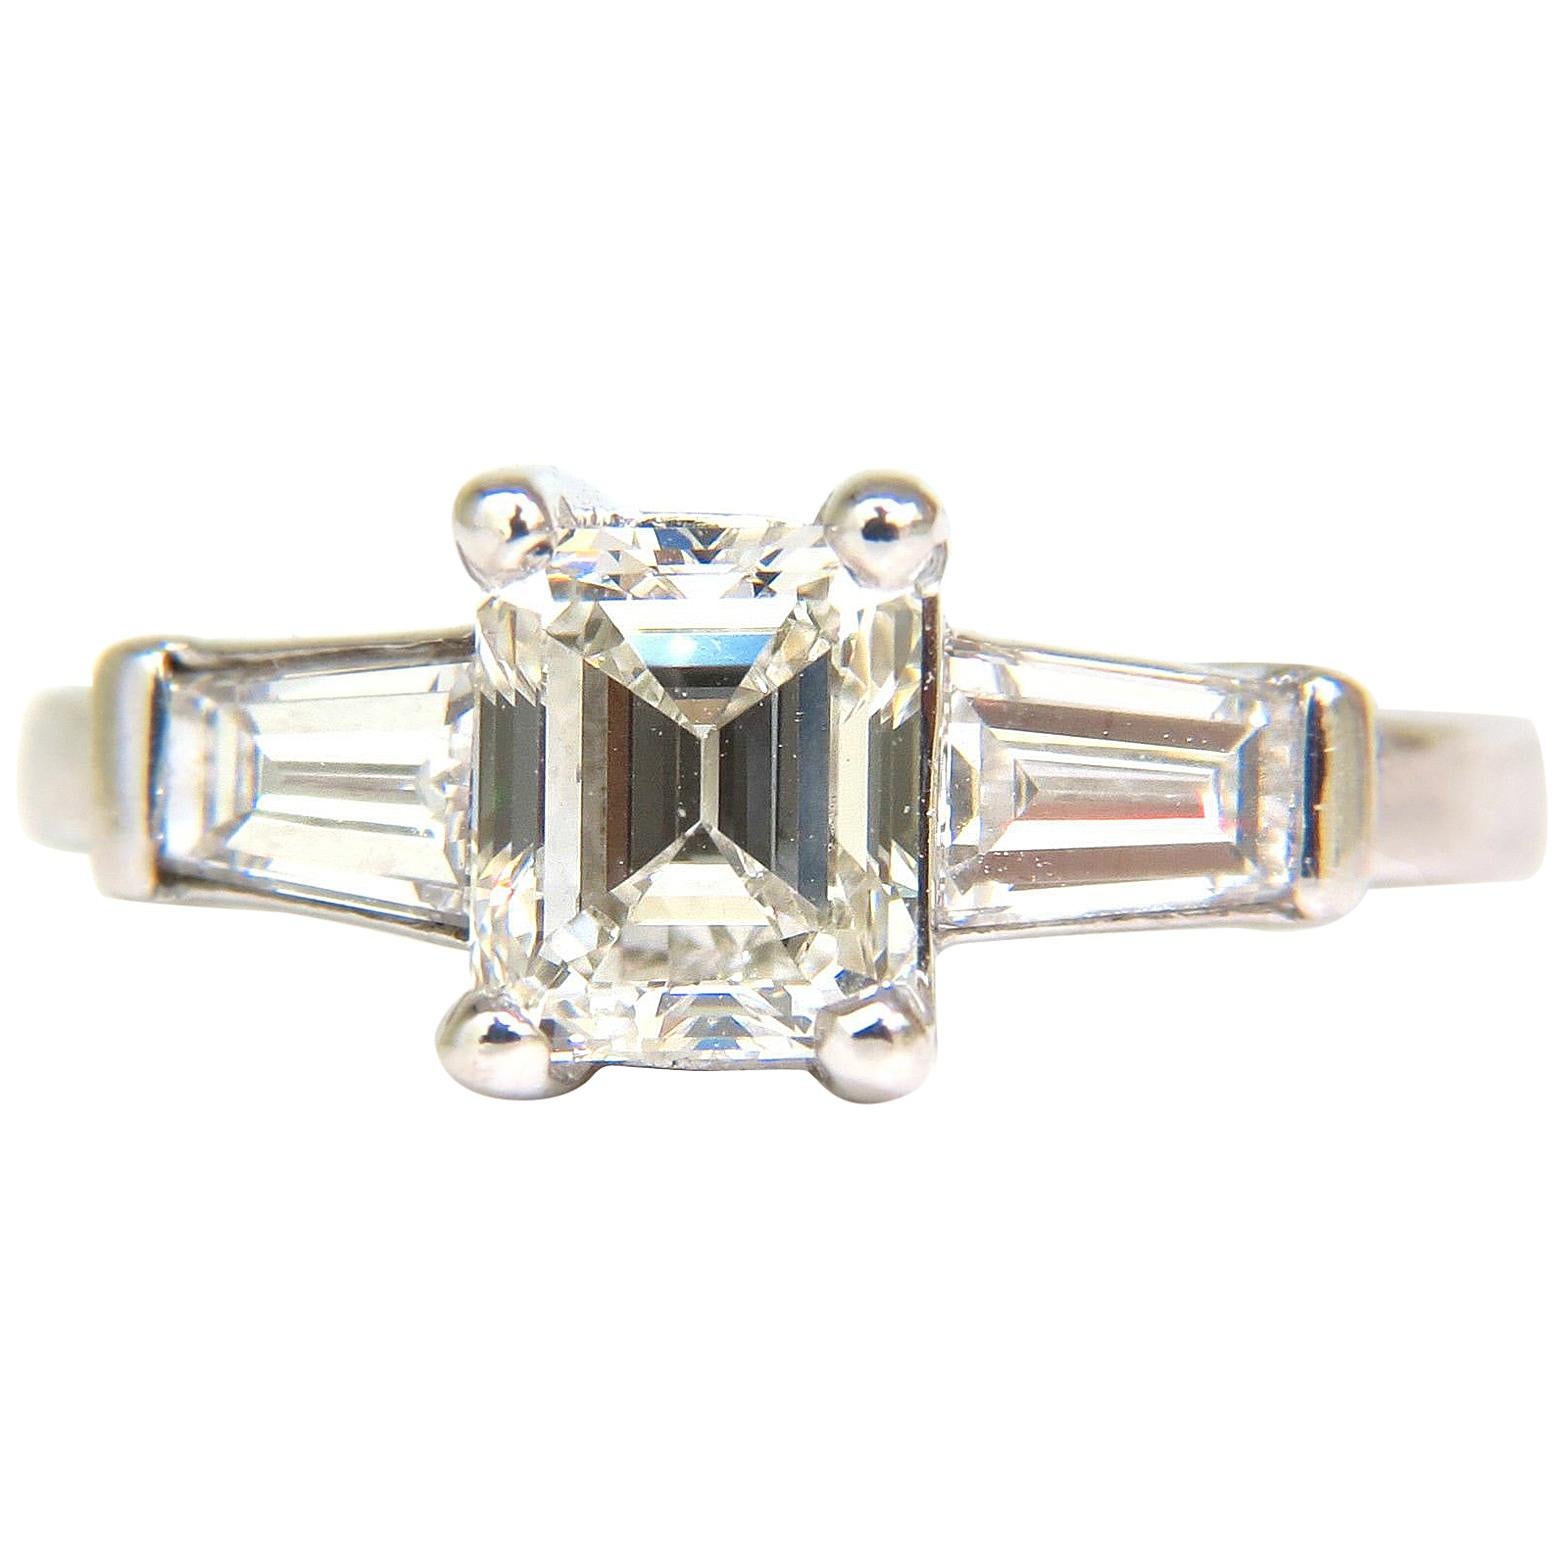 GIA 1.56 Carat Brilliant Emerald Cut Diamond Ring J/VVS2 Solitaire with Accents